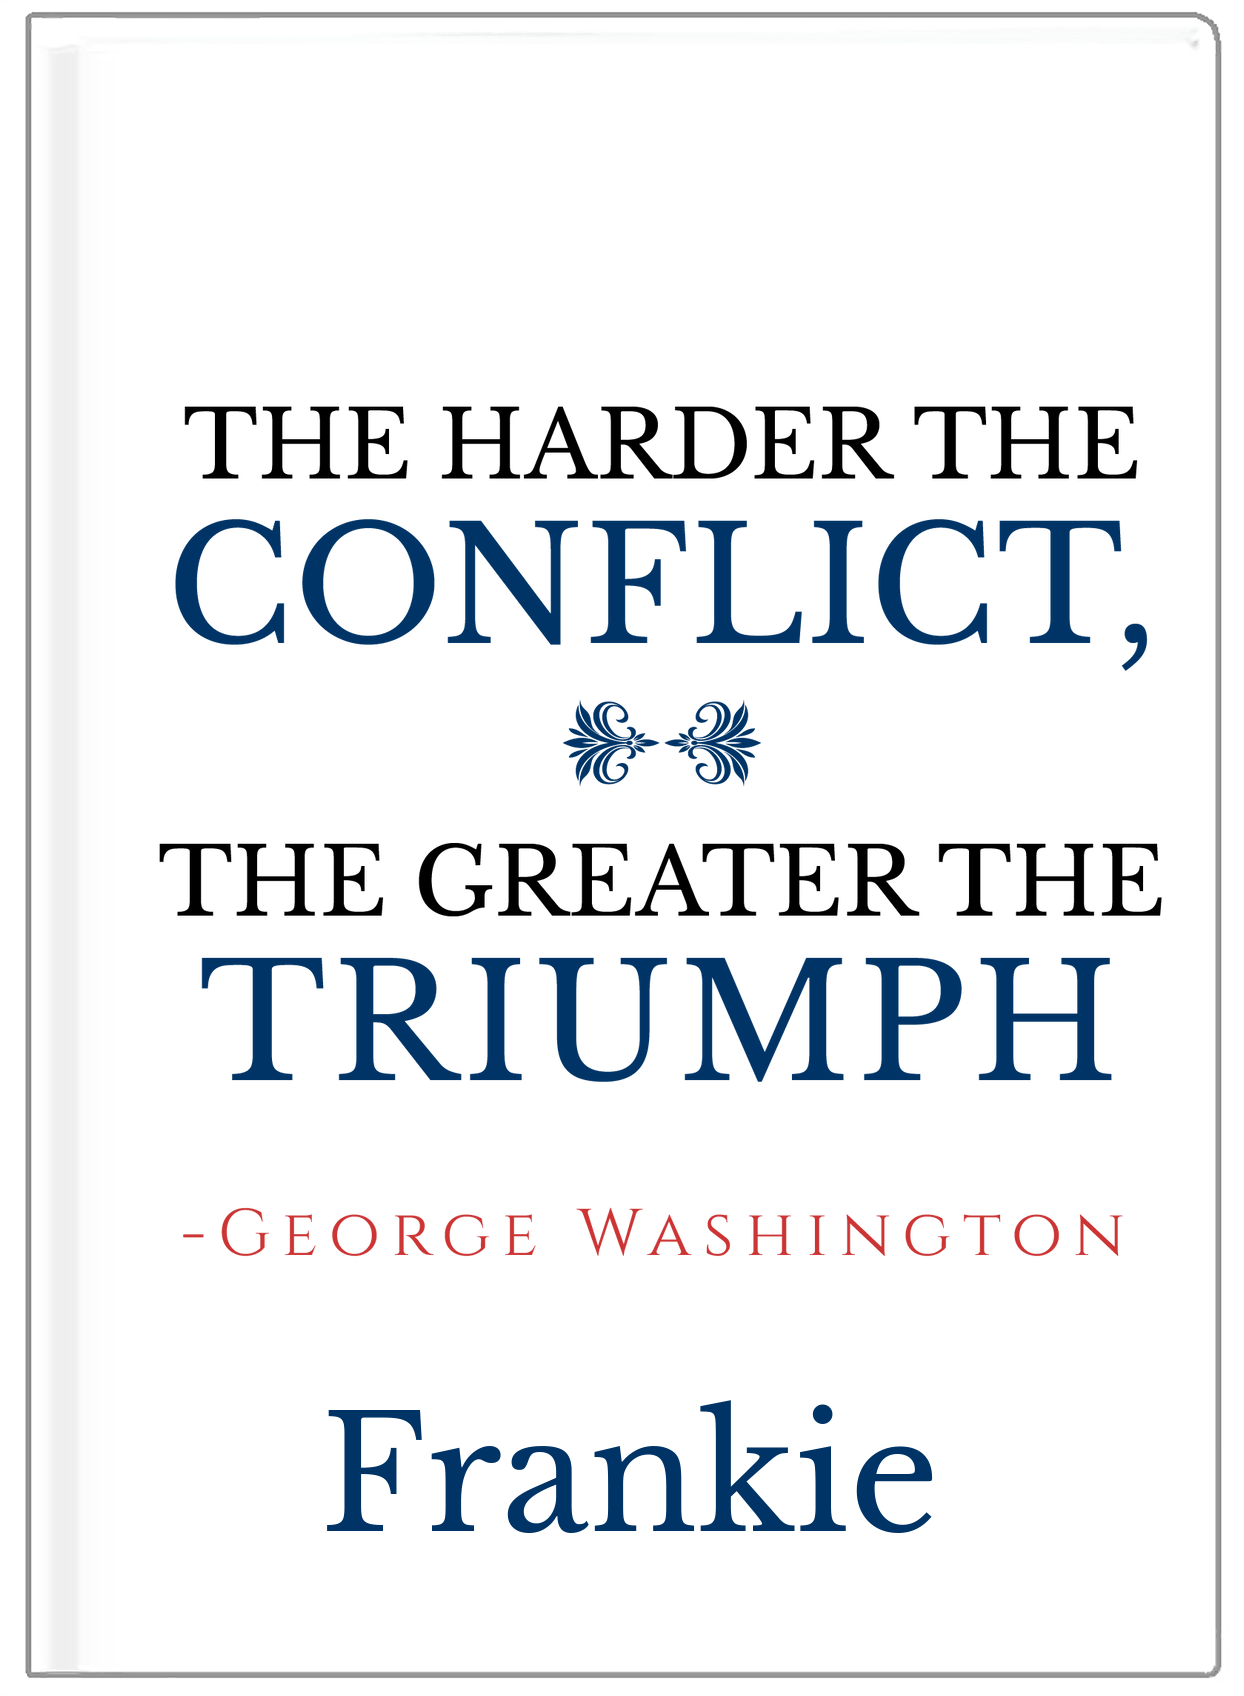 Personalized Famous Quotes Journal - George Washington - Front View